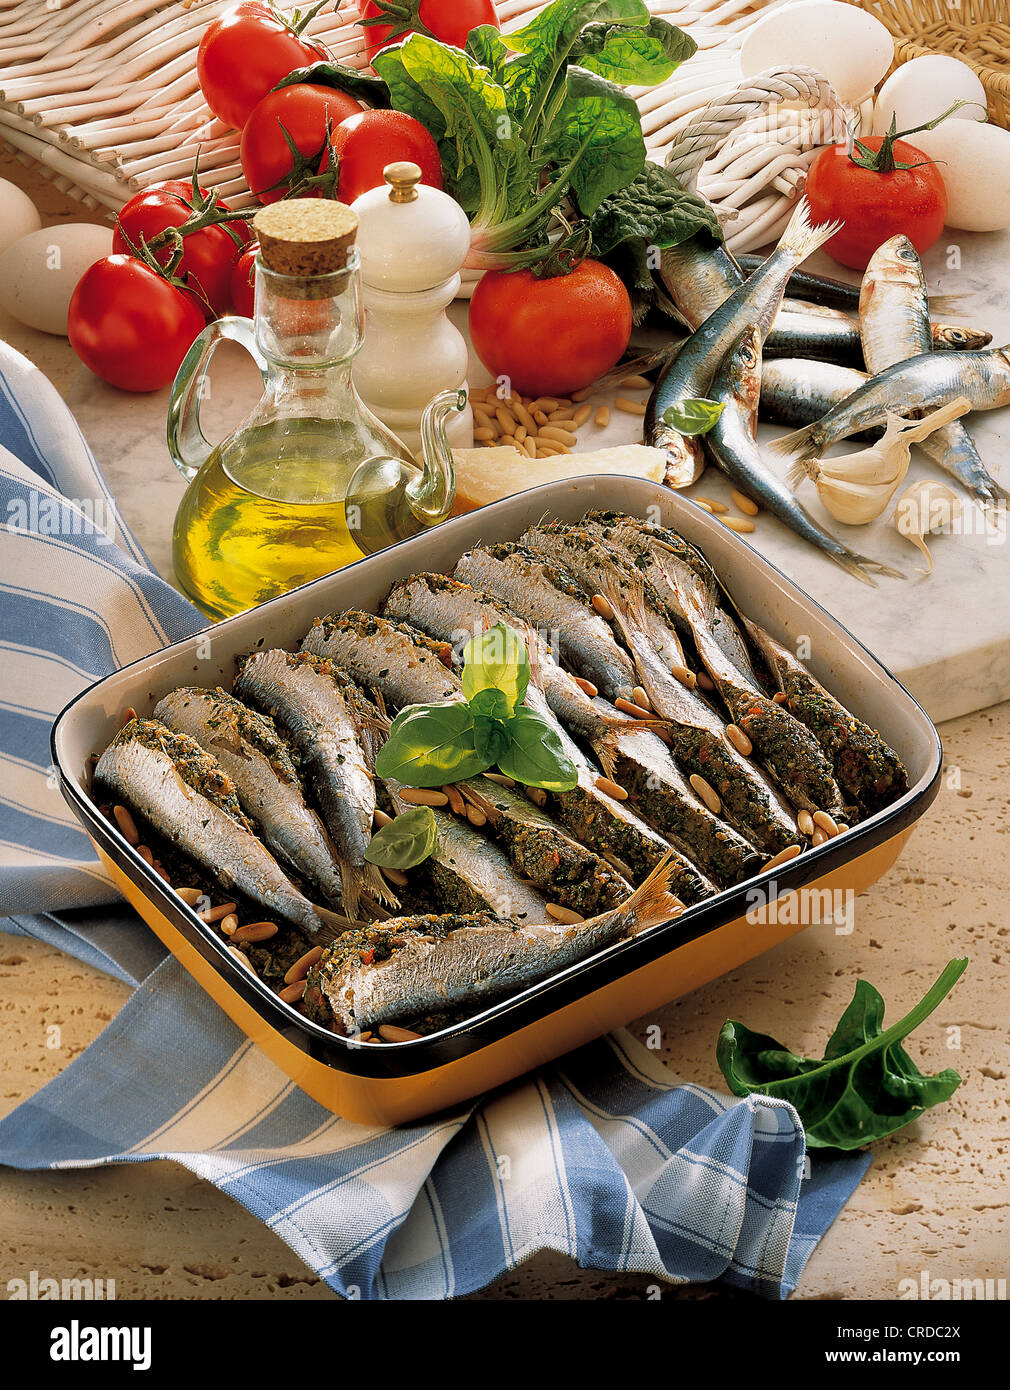 Stuffed sardines with Parmesan cheese, Italy. Stock Photo